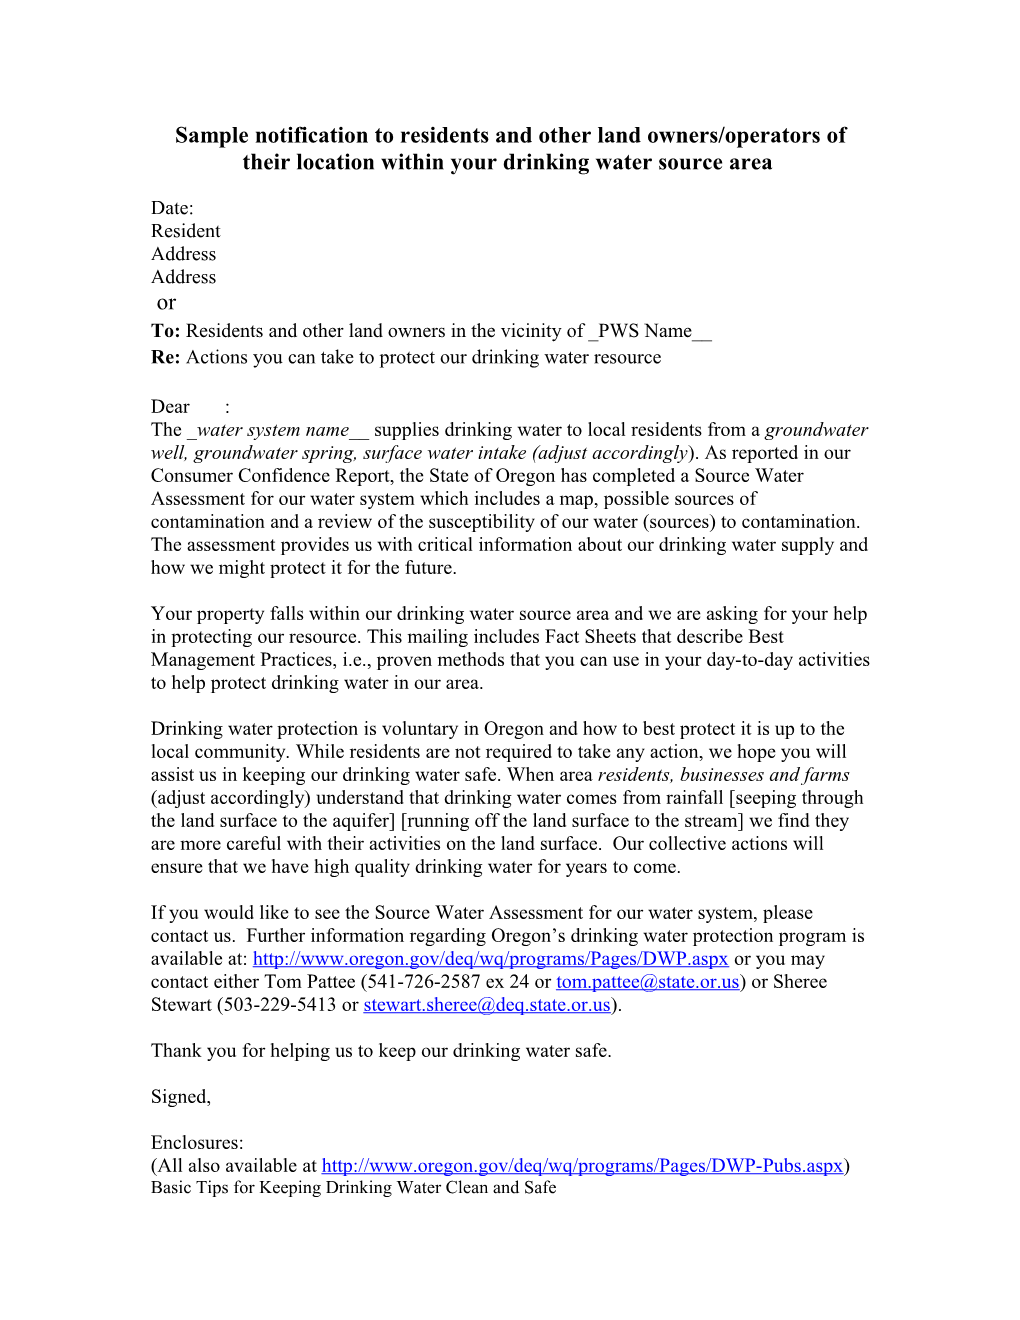 Example Letter to Residents